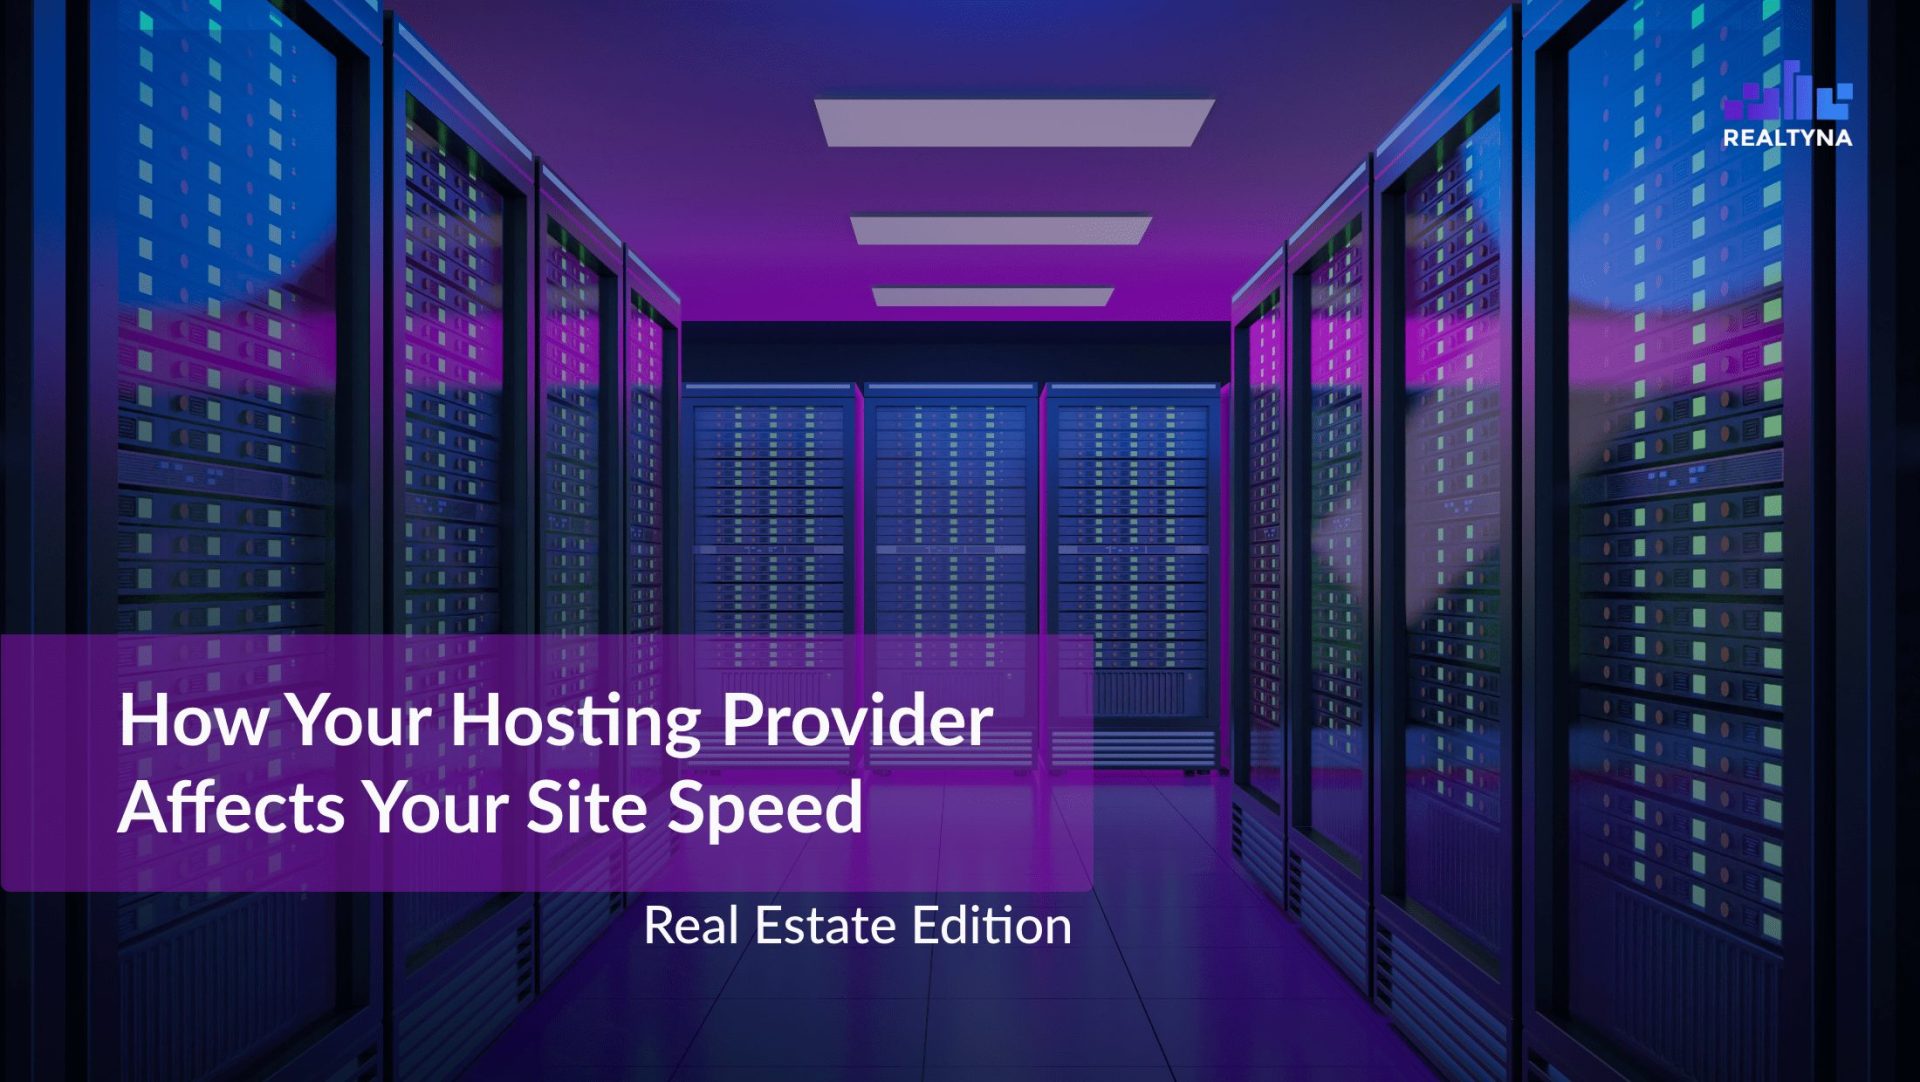 rna hosting provider affects site speed